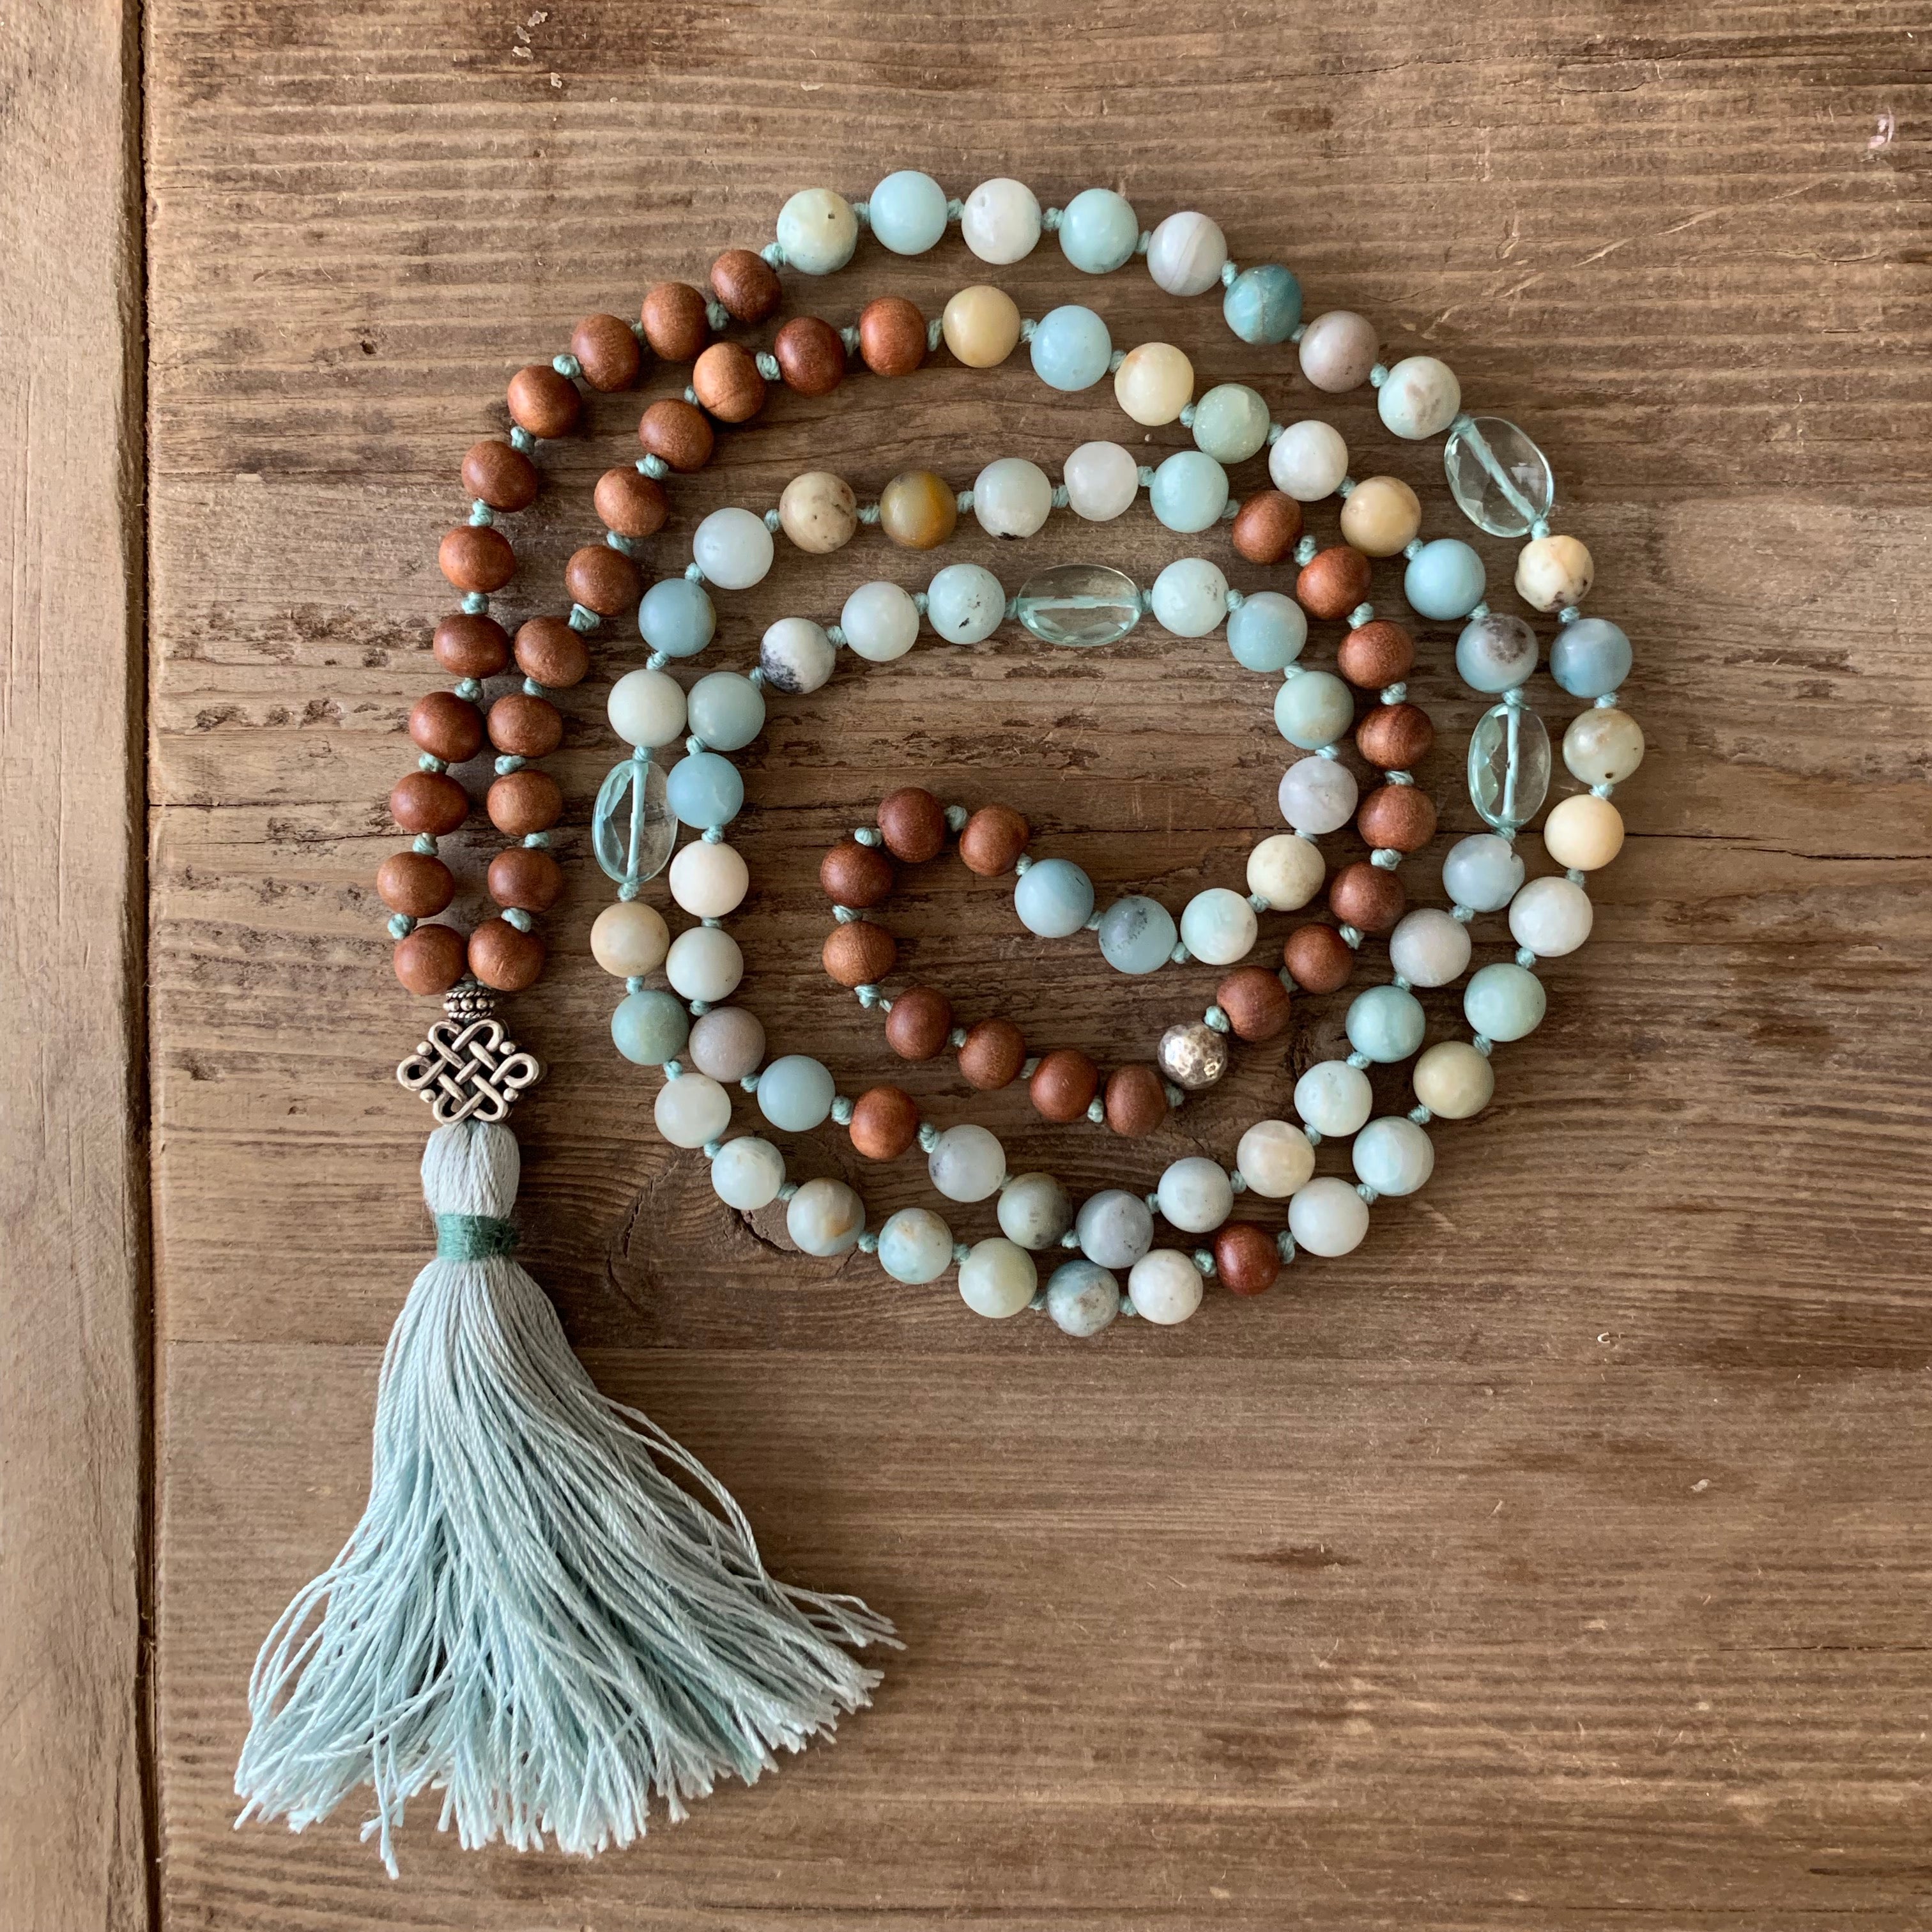 Amazonite and Blue Topaz with Sandalwood 108 Bead Mala with Sterling Silver Knot Guru Bead